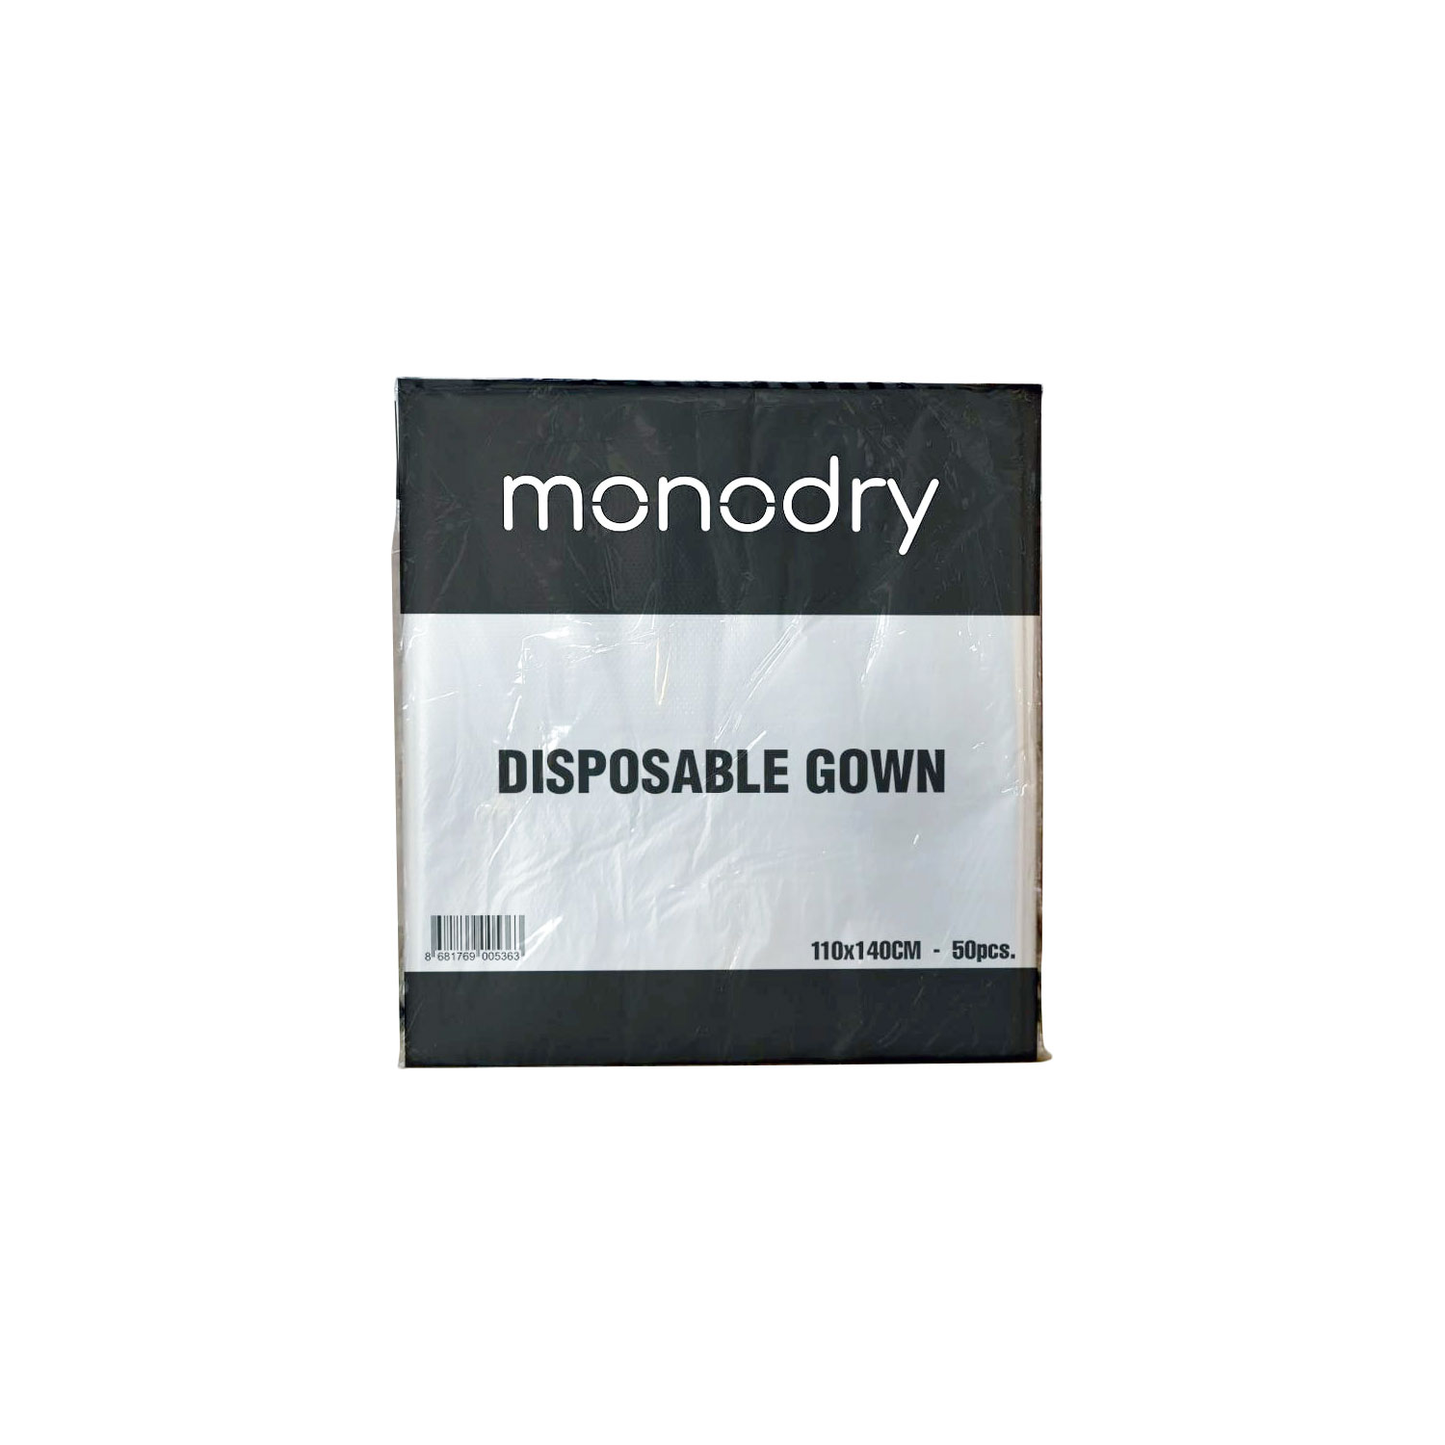 Monodry Disposable Gowns (x50)